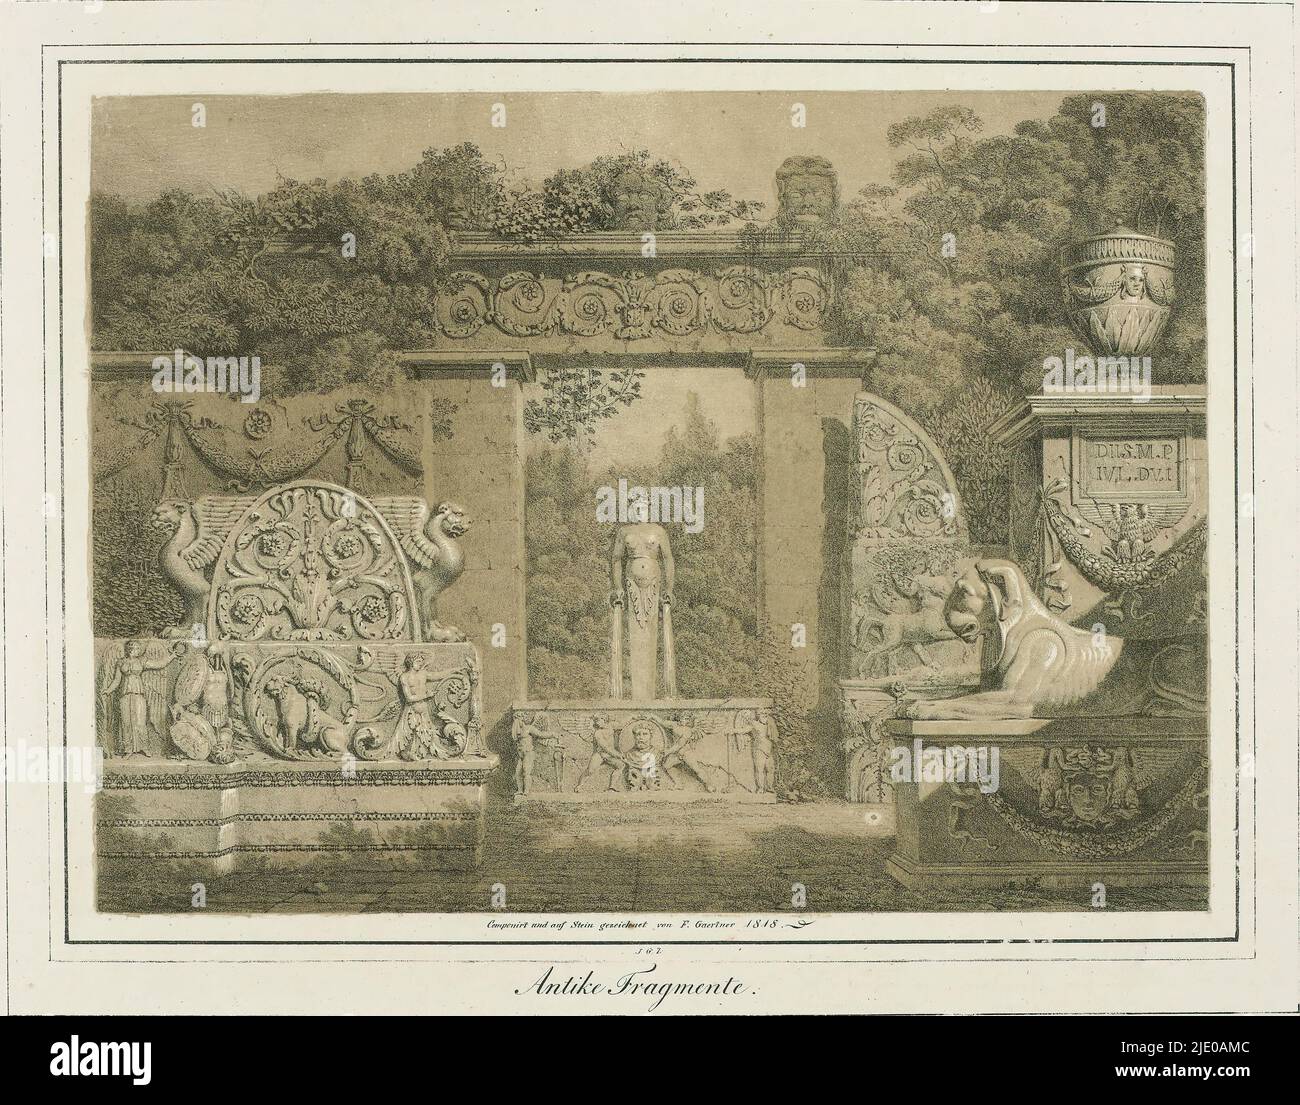 Architectural fantasy with antique elements, Antike Fragmente (title on object), print maker: Friedrich von Gärtner, (mentioned on object), after design by: Friedrich von Gärtner, (mentioned on object), 1818, paper, height 410 mm × width 570 mm Stock Photo